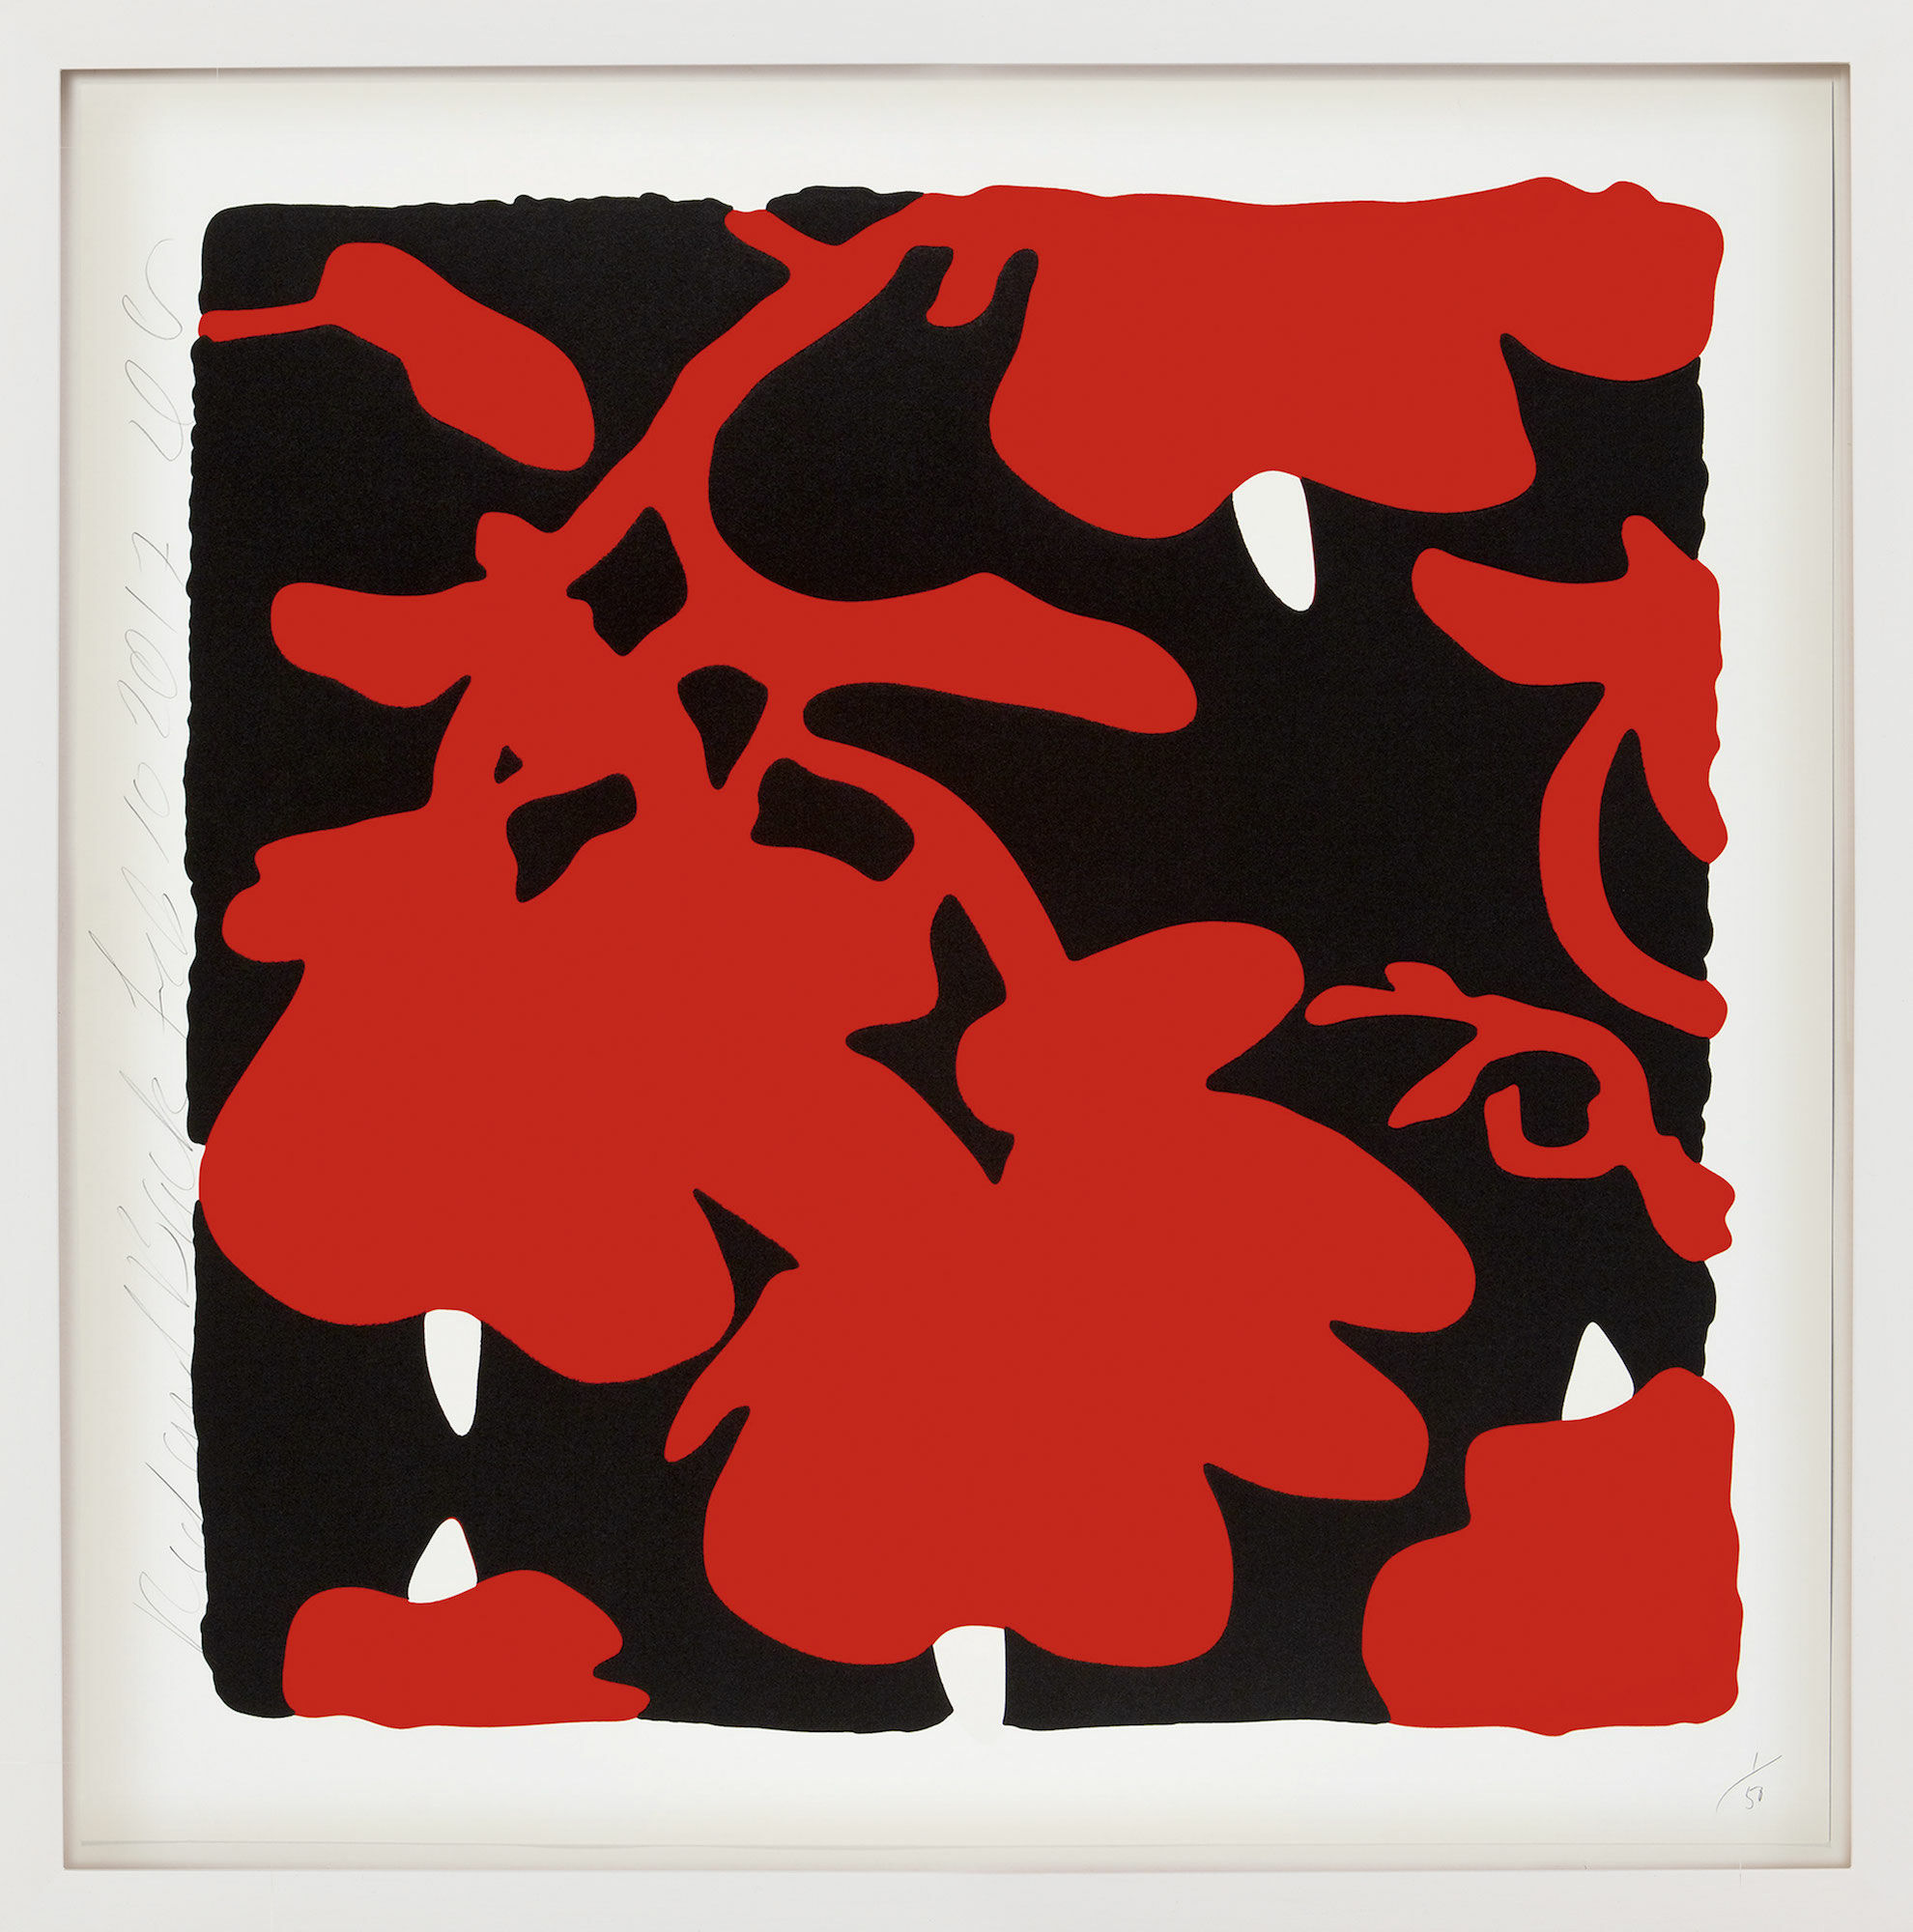 Picture "Lantern flowers - Red and Black" (2017) by Donald Sultan